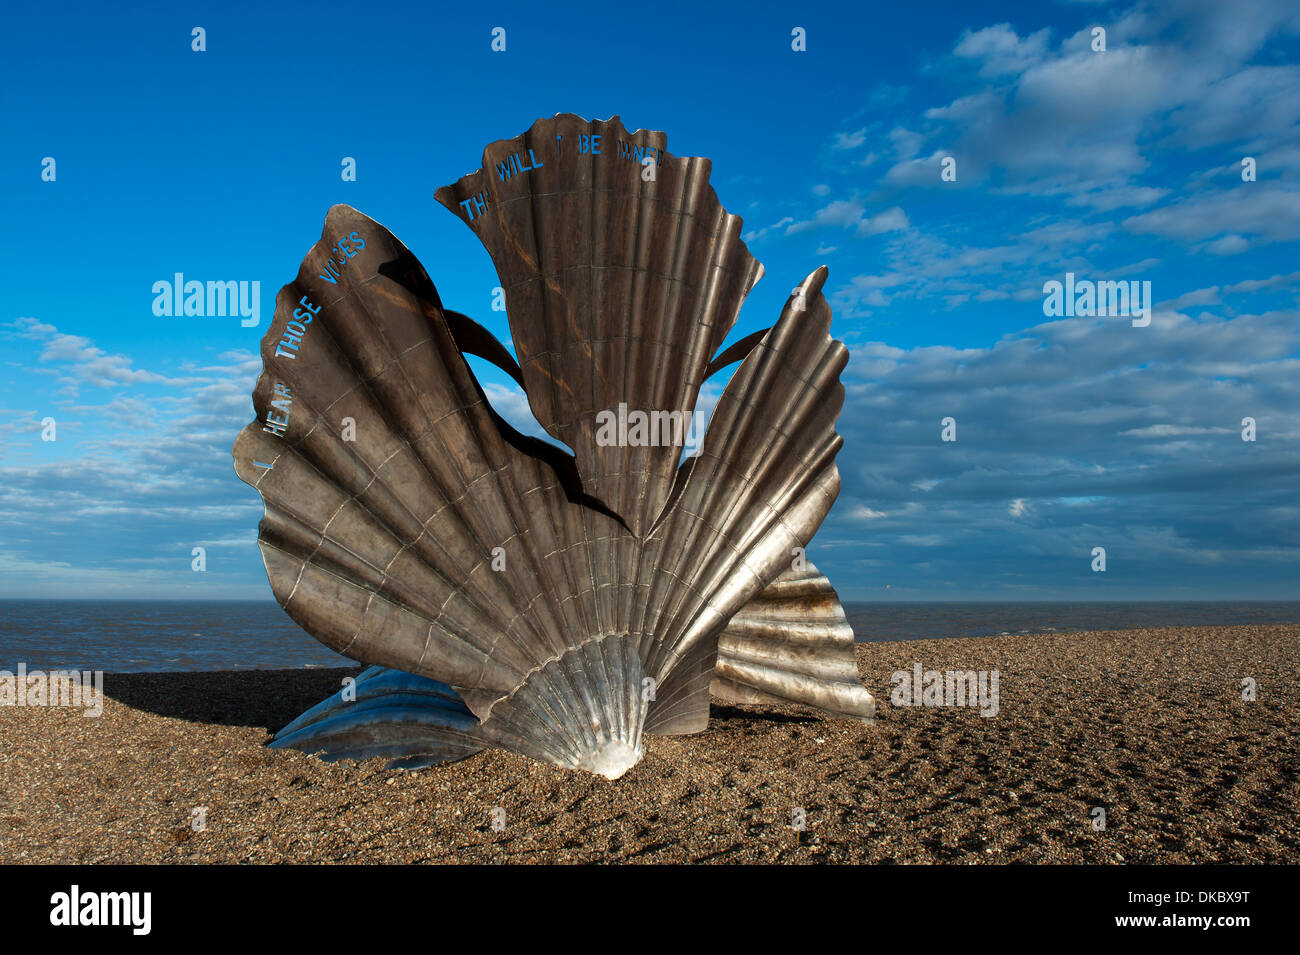 The scallop, a sculpture to celebrate Benjamin Britten by Maggi Hambling made in stainless steel, beach of Aldeburgh suffolk eng Stock Photo